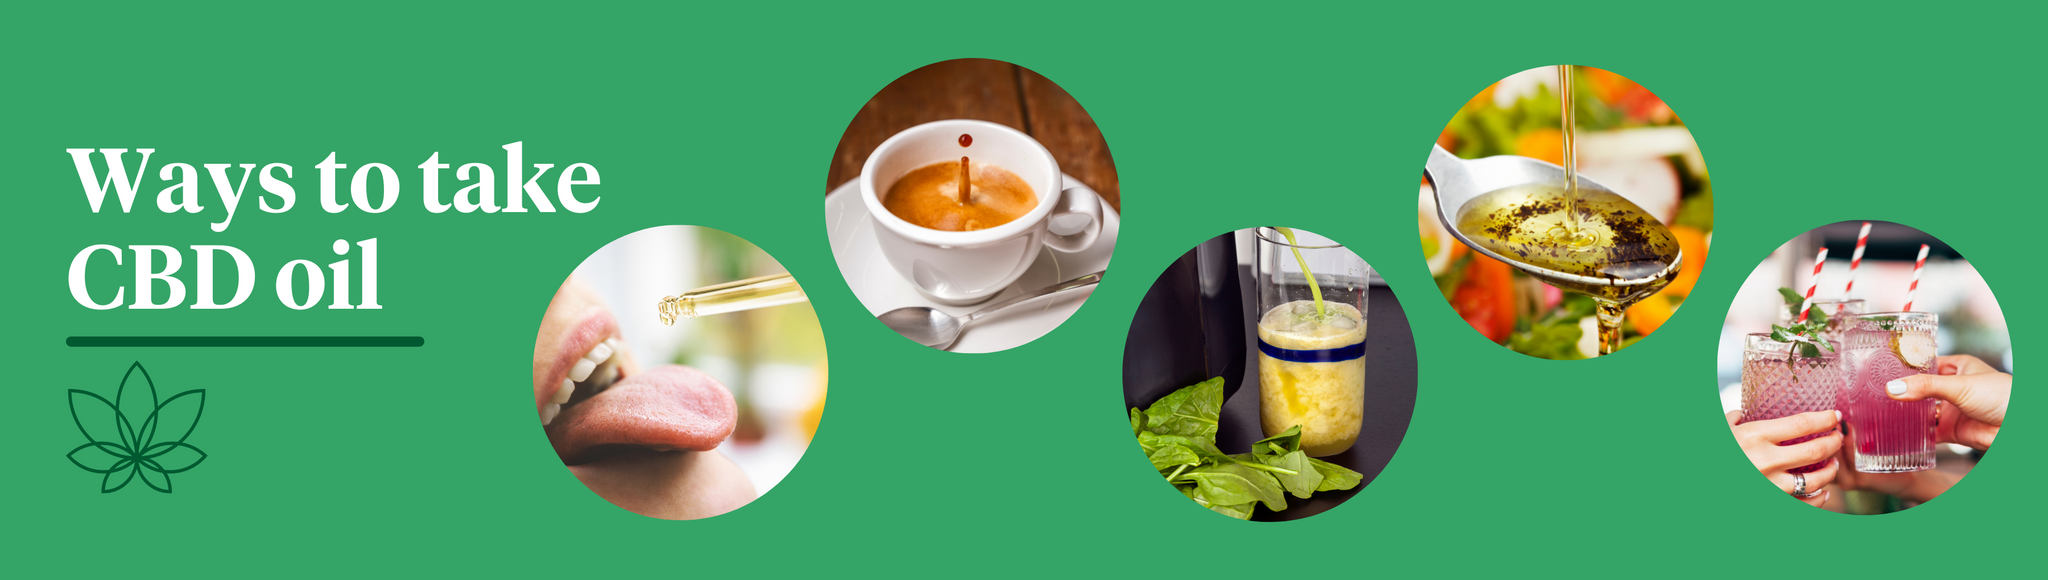 A green background with the Supreme CBD logo on the bottom left with white text above saying: "ways to take CBD Oil". Five images going across of the following: a woman taking CBD oil, a cup of coffee, a smoothie, oil and a cocktail.